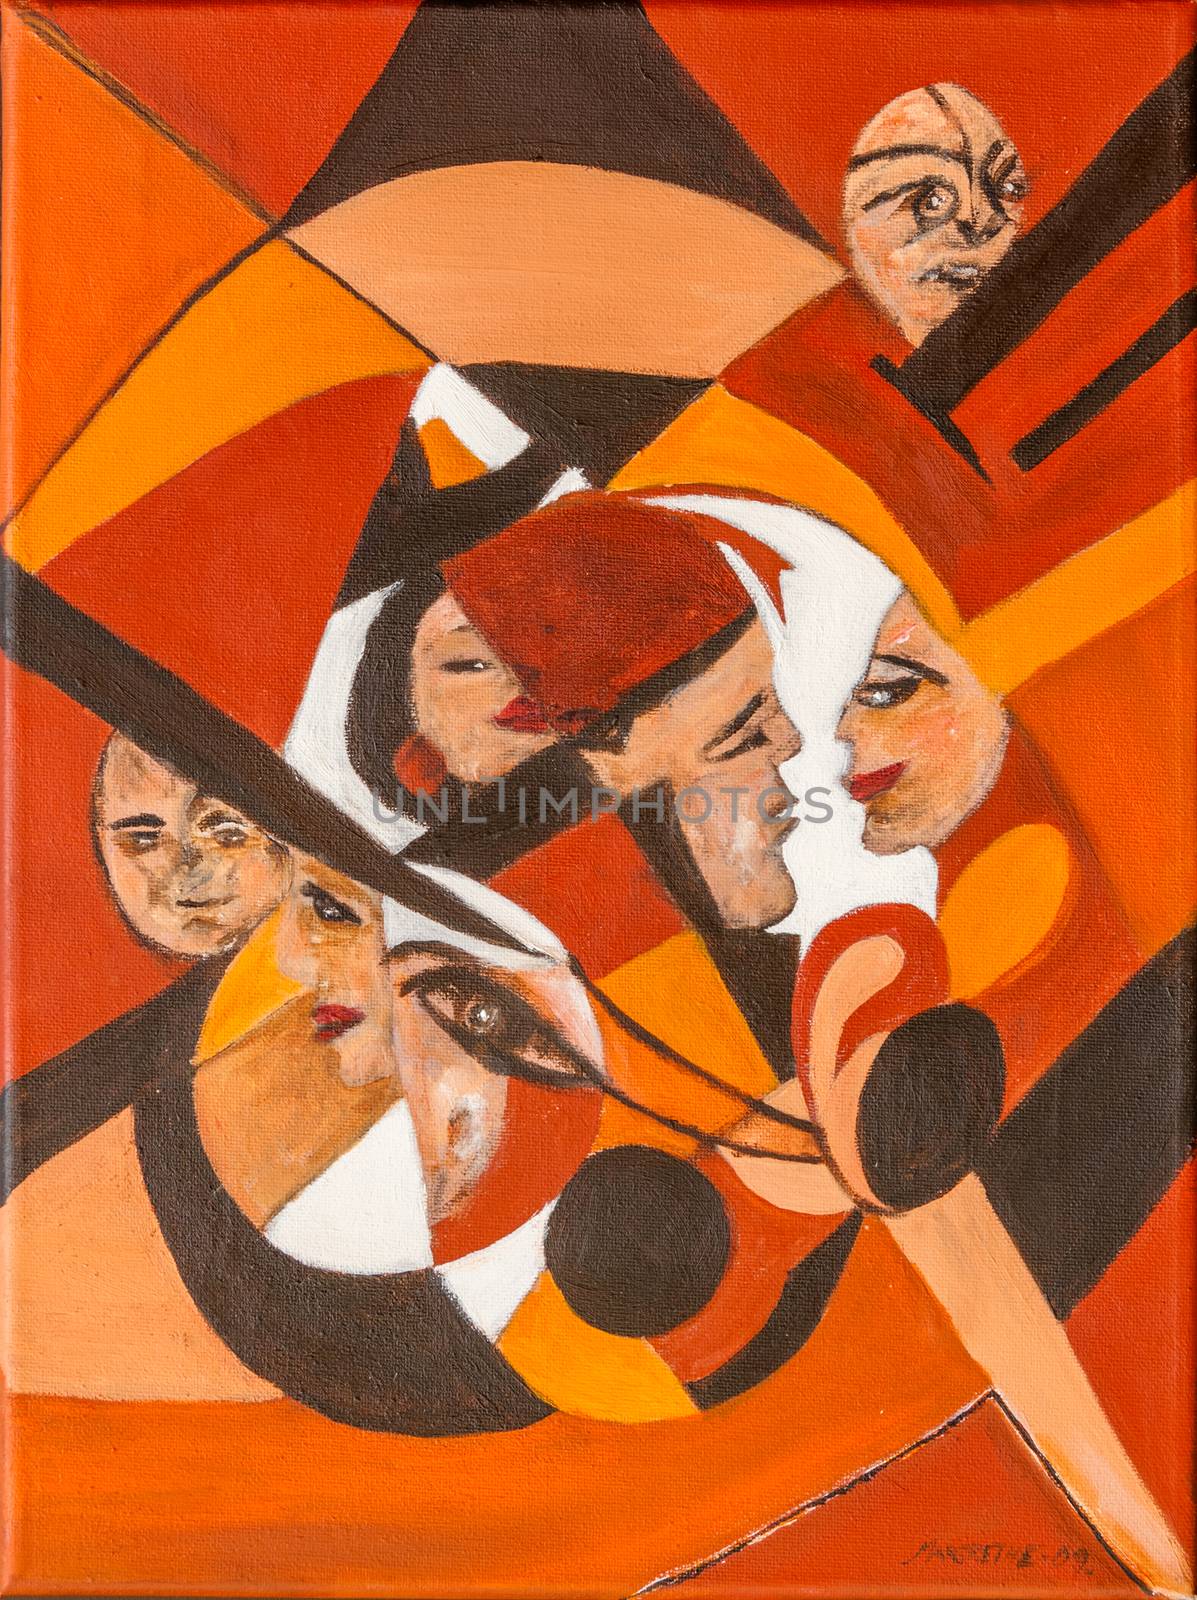 The clown in the circle. Both figurative and non-figurative at the same time. Different clown faces in a circle. A scene from many situations in life.Orange, dark brown, white colors.